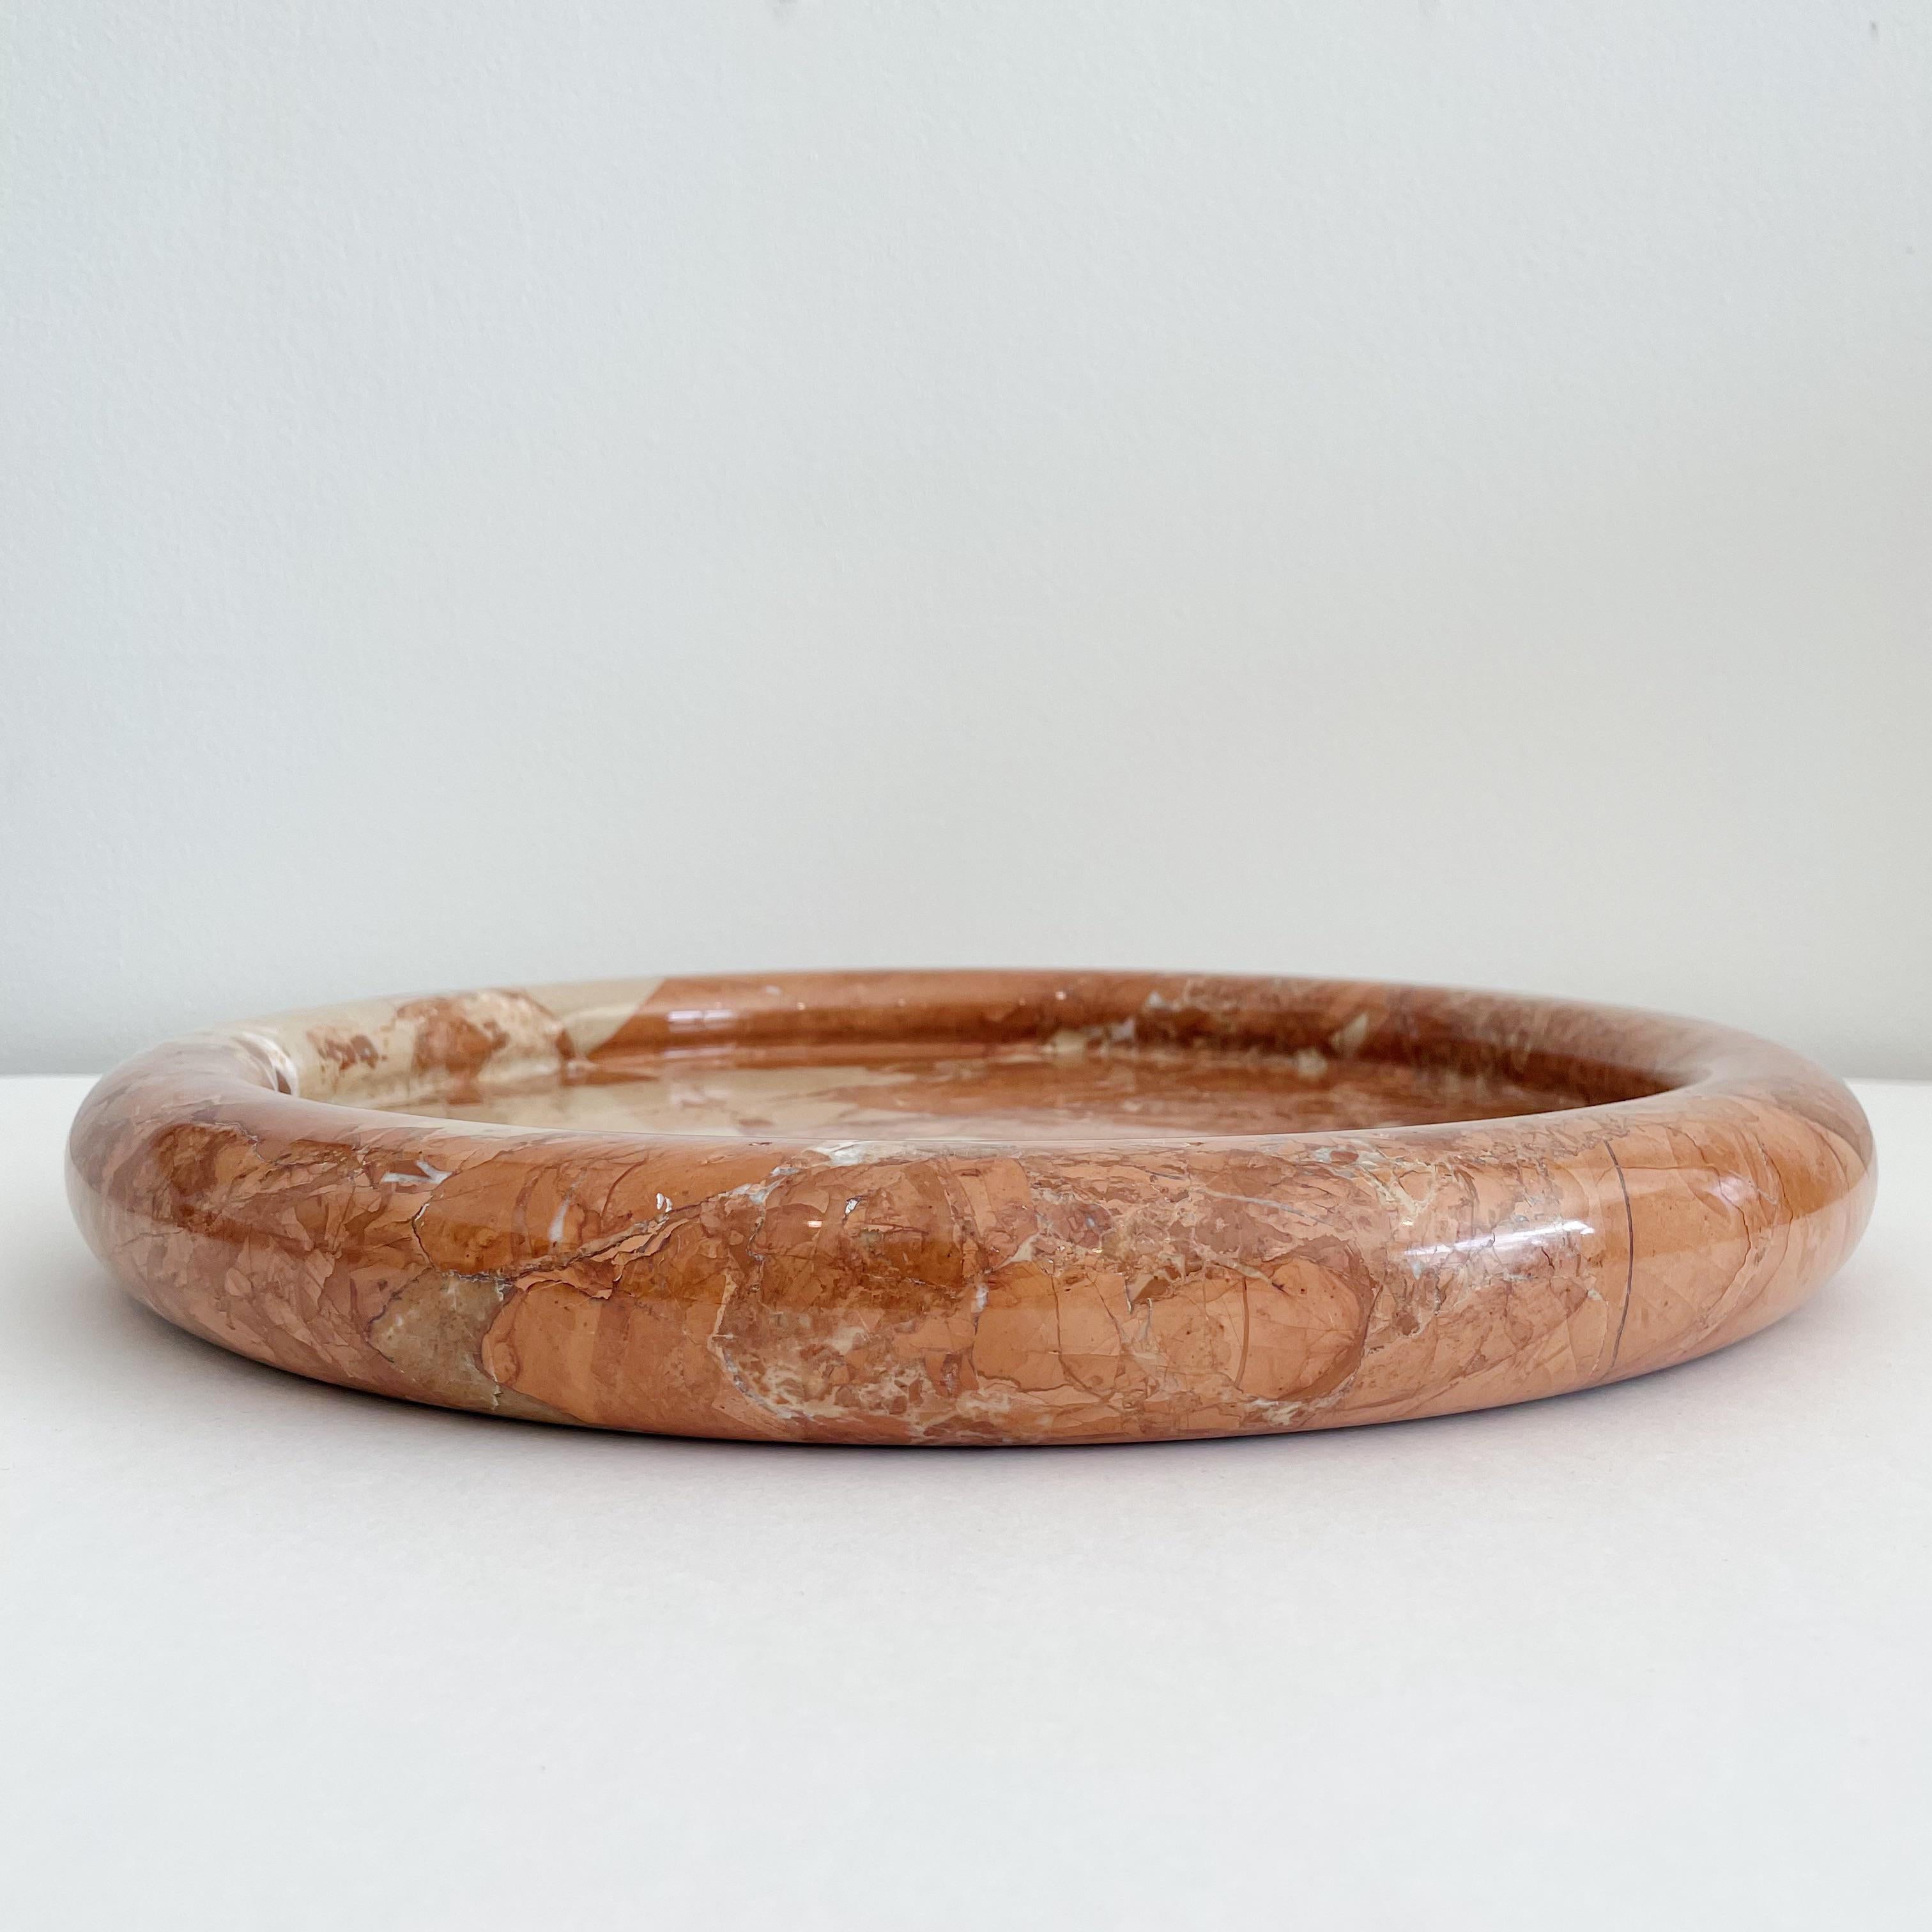 Large low-rimmed Rosa di Persia solid marble dish by Egidio Di Rosa and Pier Alessandro Giusti for Up&Up from the early 1970s. The veined rouge red earth colored solid marble dish is over a foot in diameter.